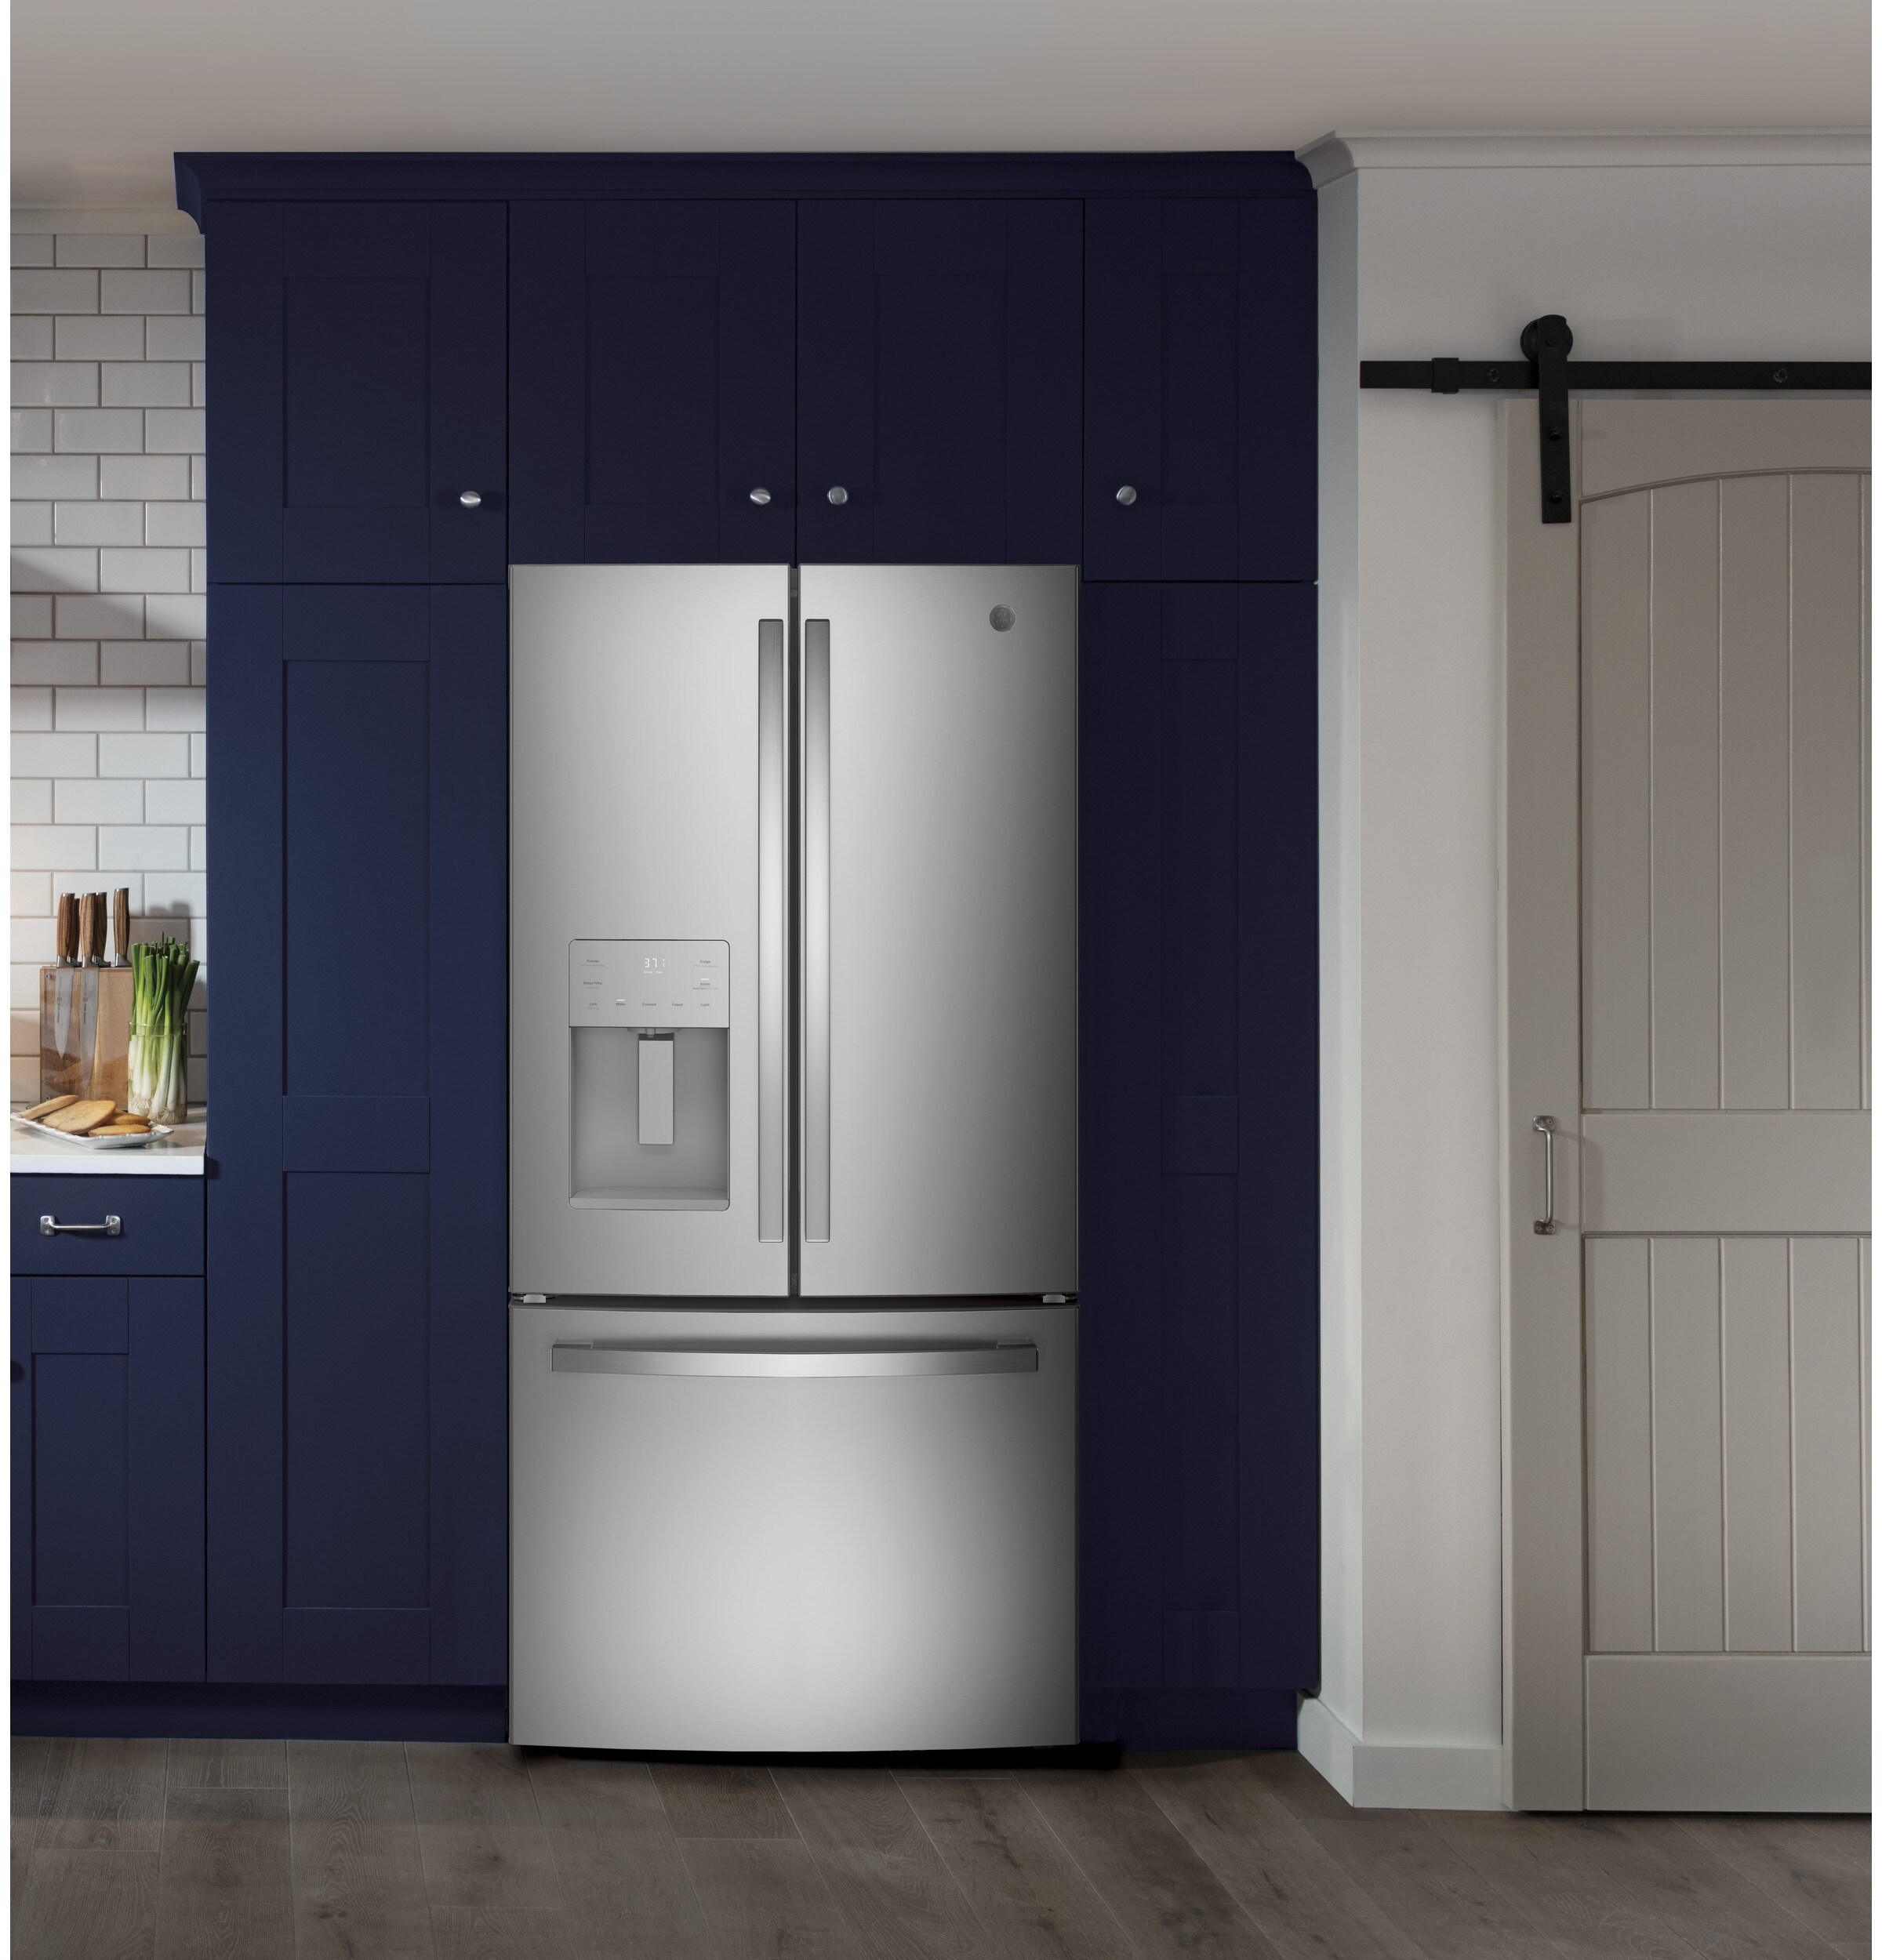 GE 17.5-cu ft Counter-depth French Door Refrigerator with Ice Maker ...